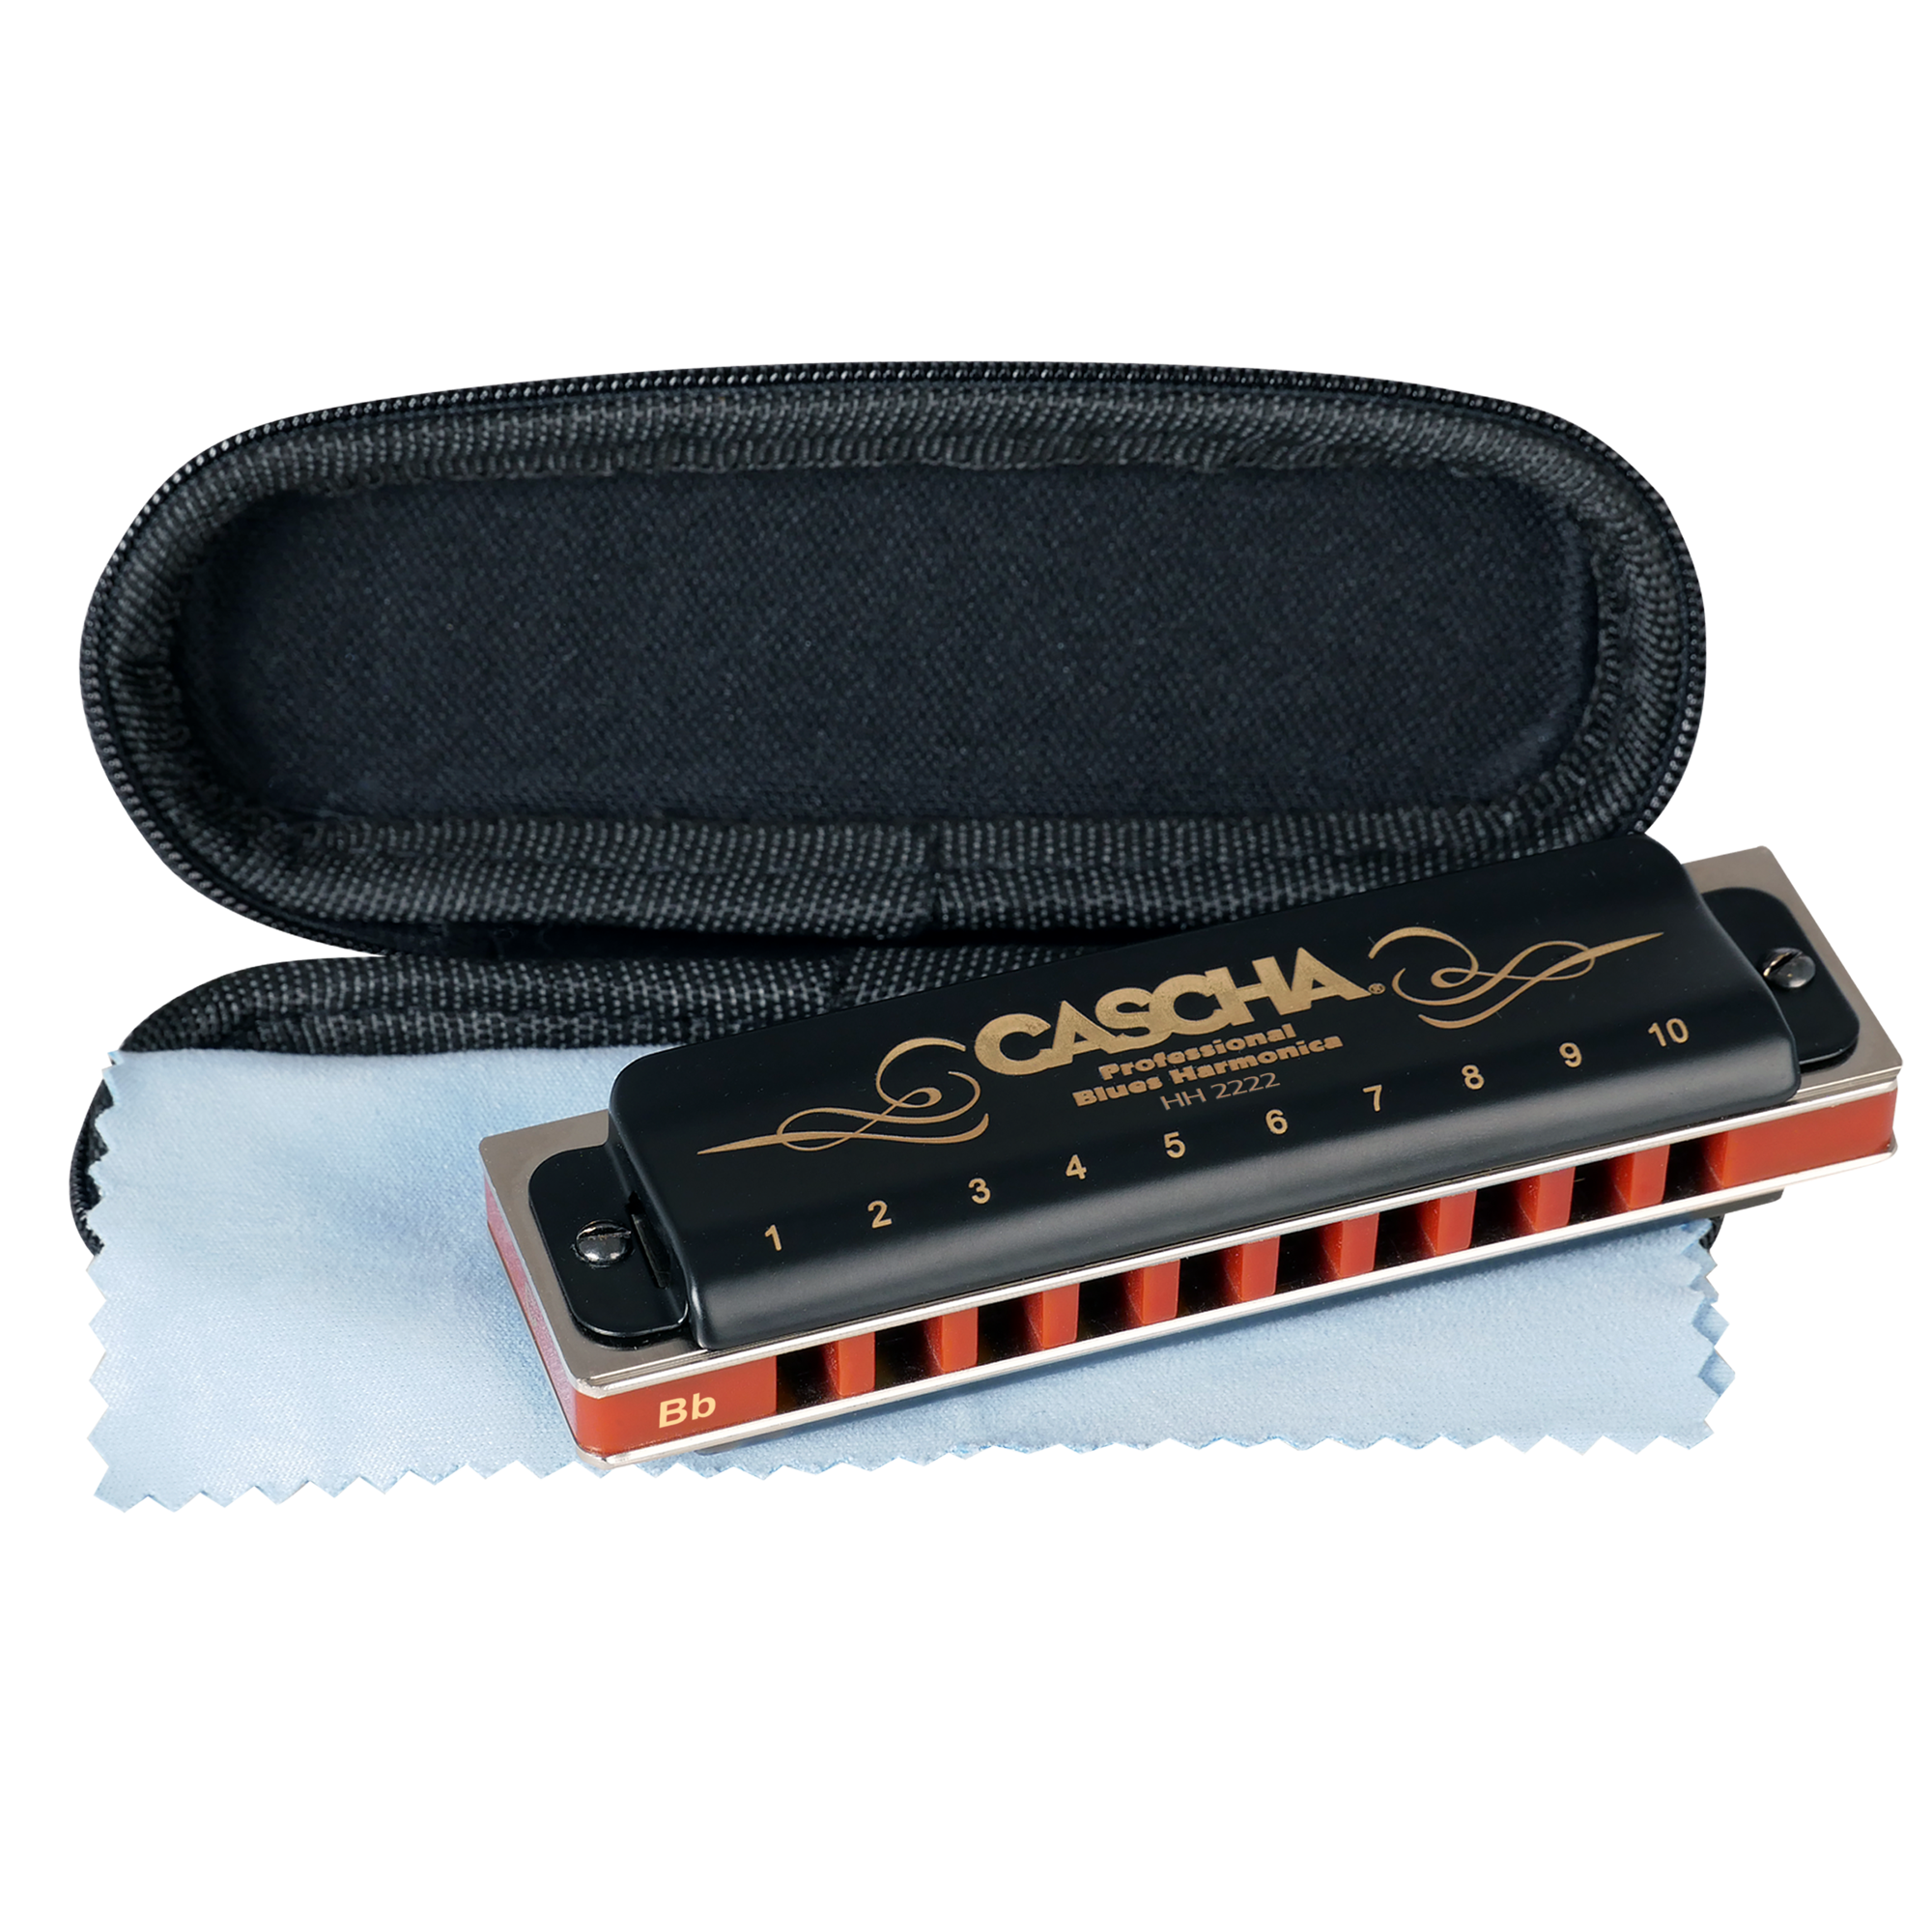 English beginners/' school CASCHA harmonica learning set including high-quality harmonica in C-Major diatonic ideal for beginners and adults case and care cloth